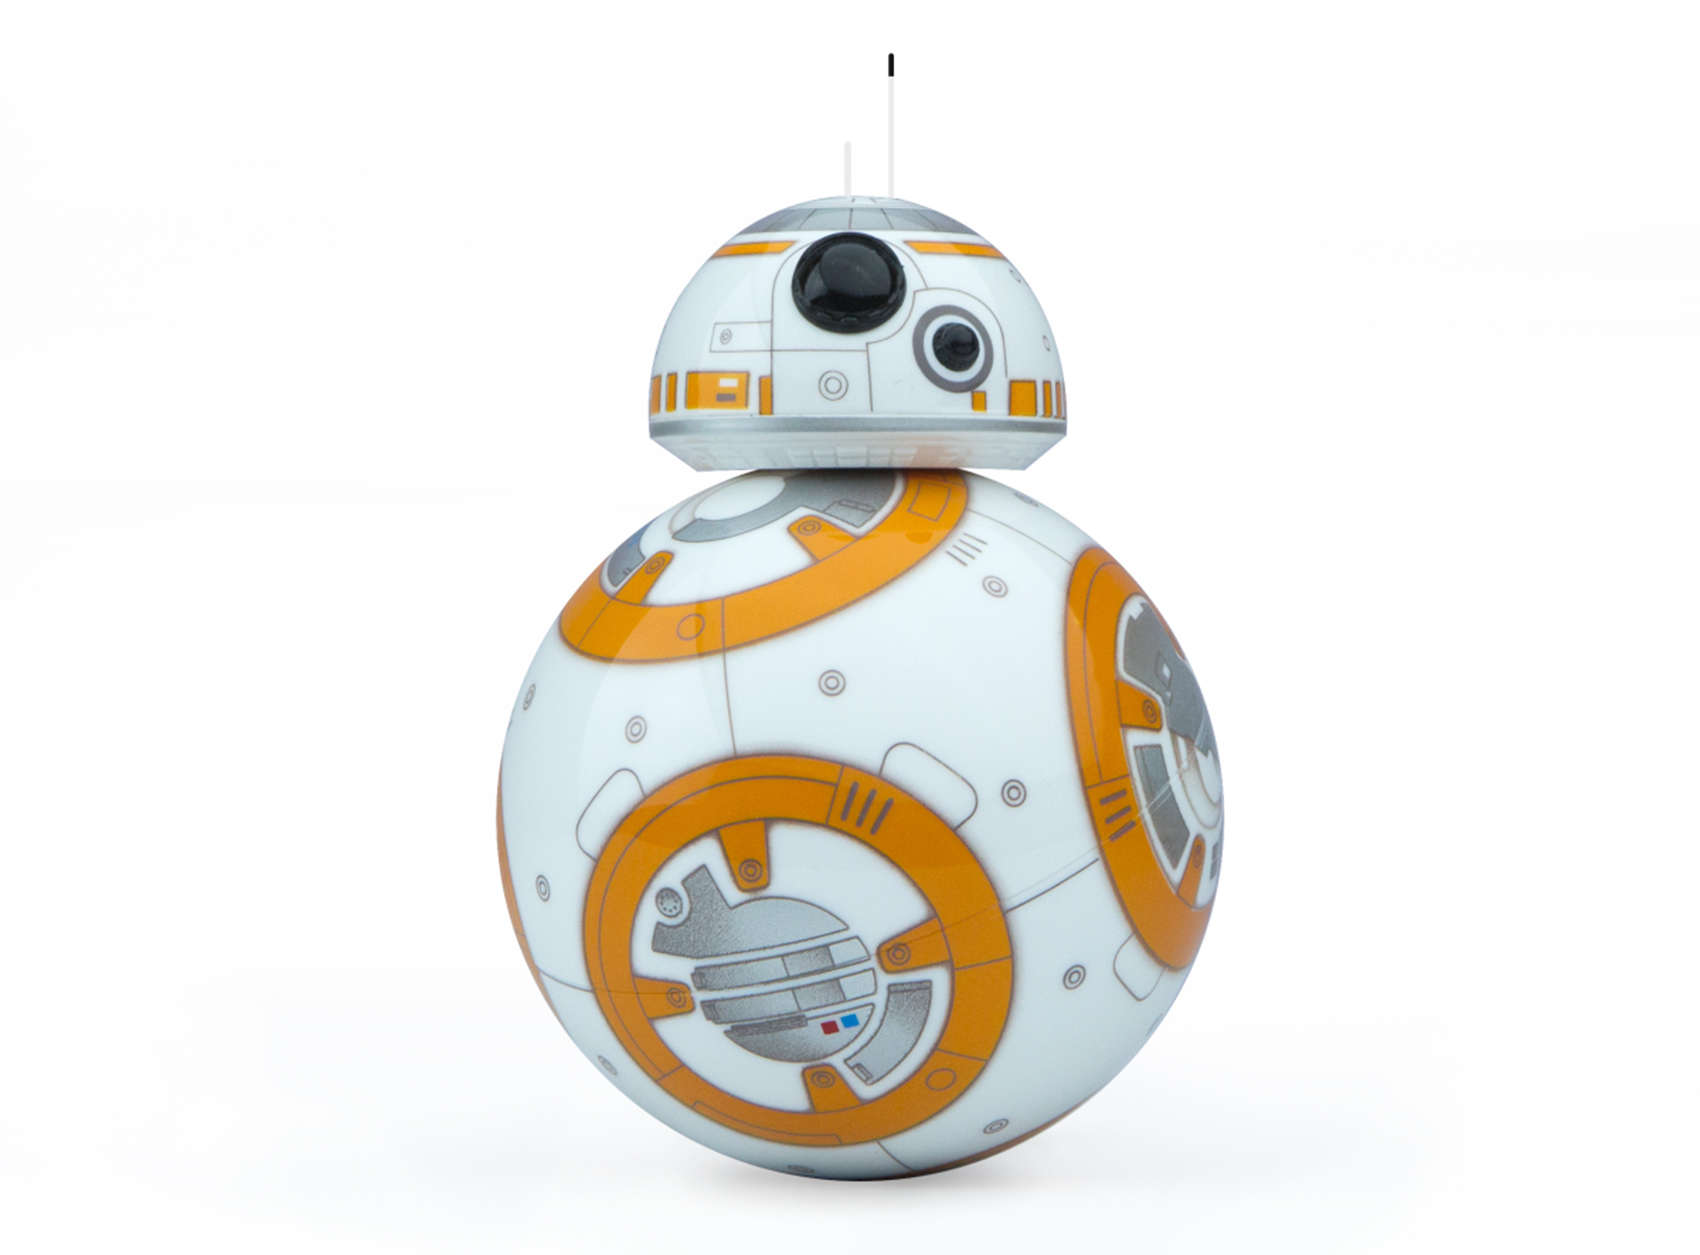 BB-8, the cute little droid from Star Wars: The Force Awakens, is now available as an app-enabled companion.